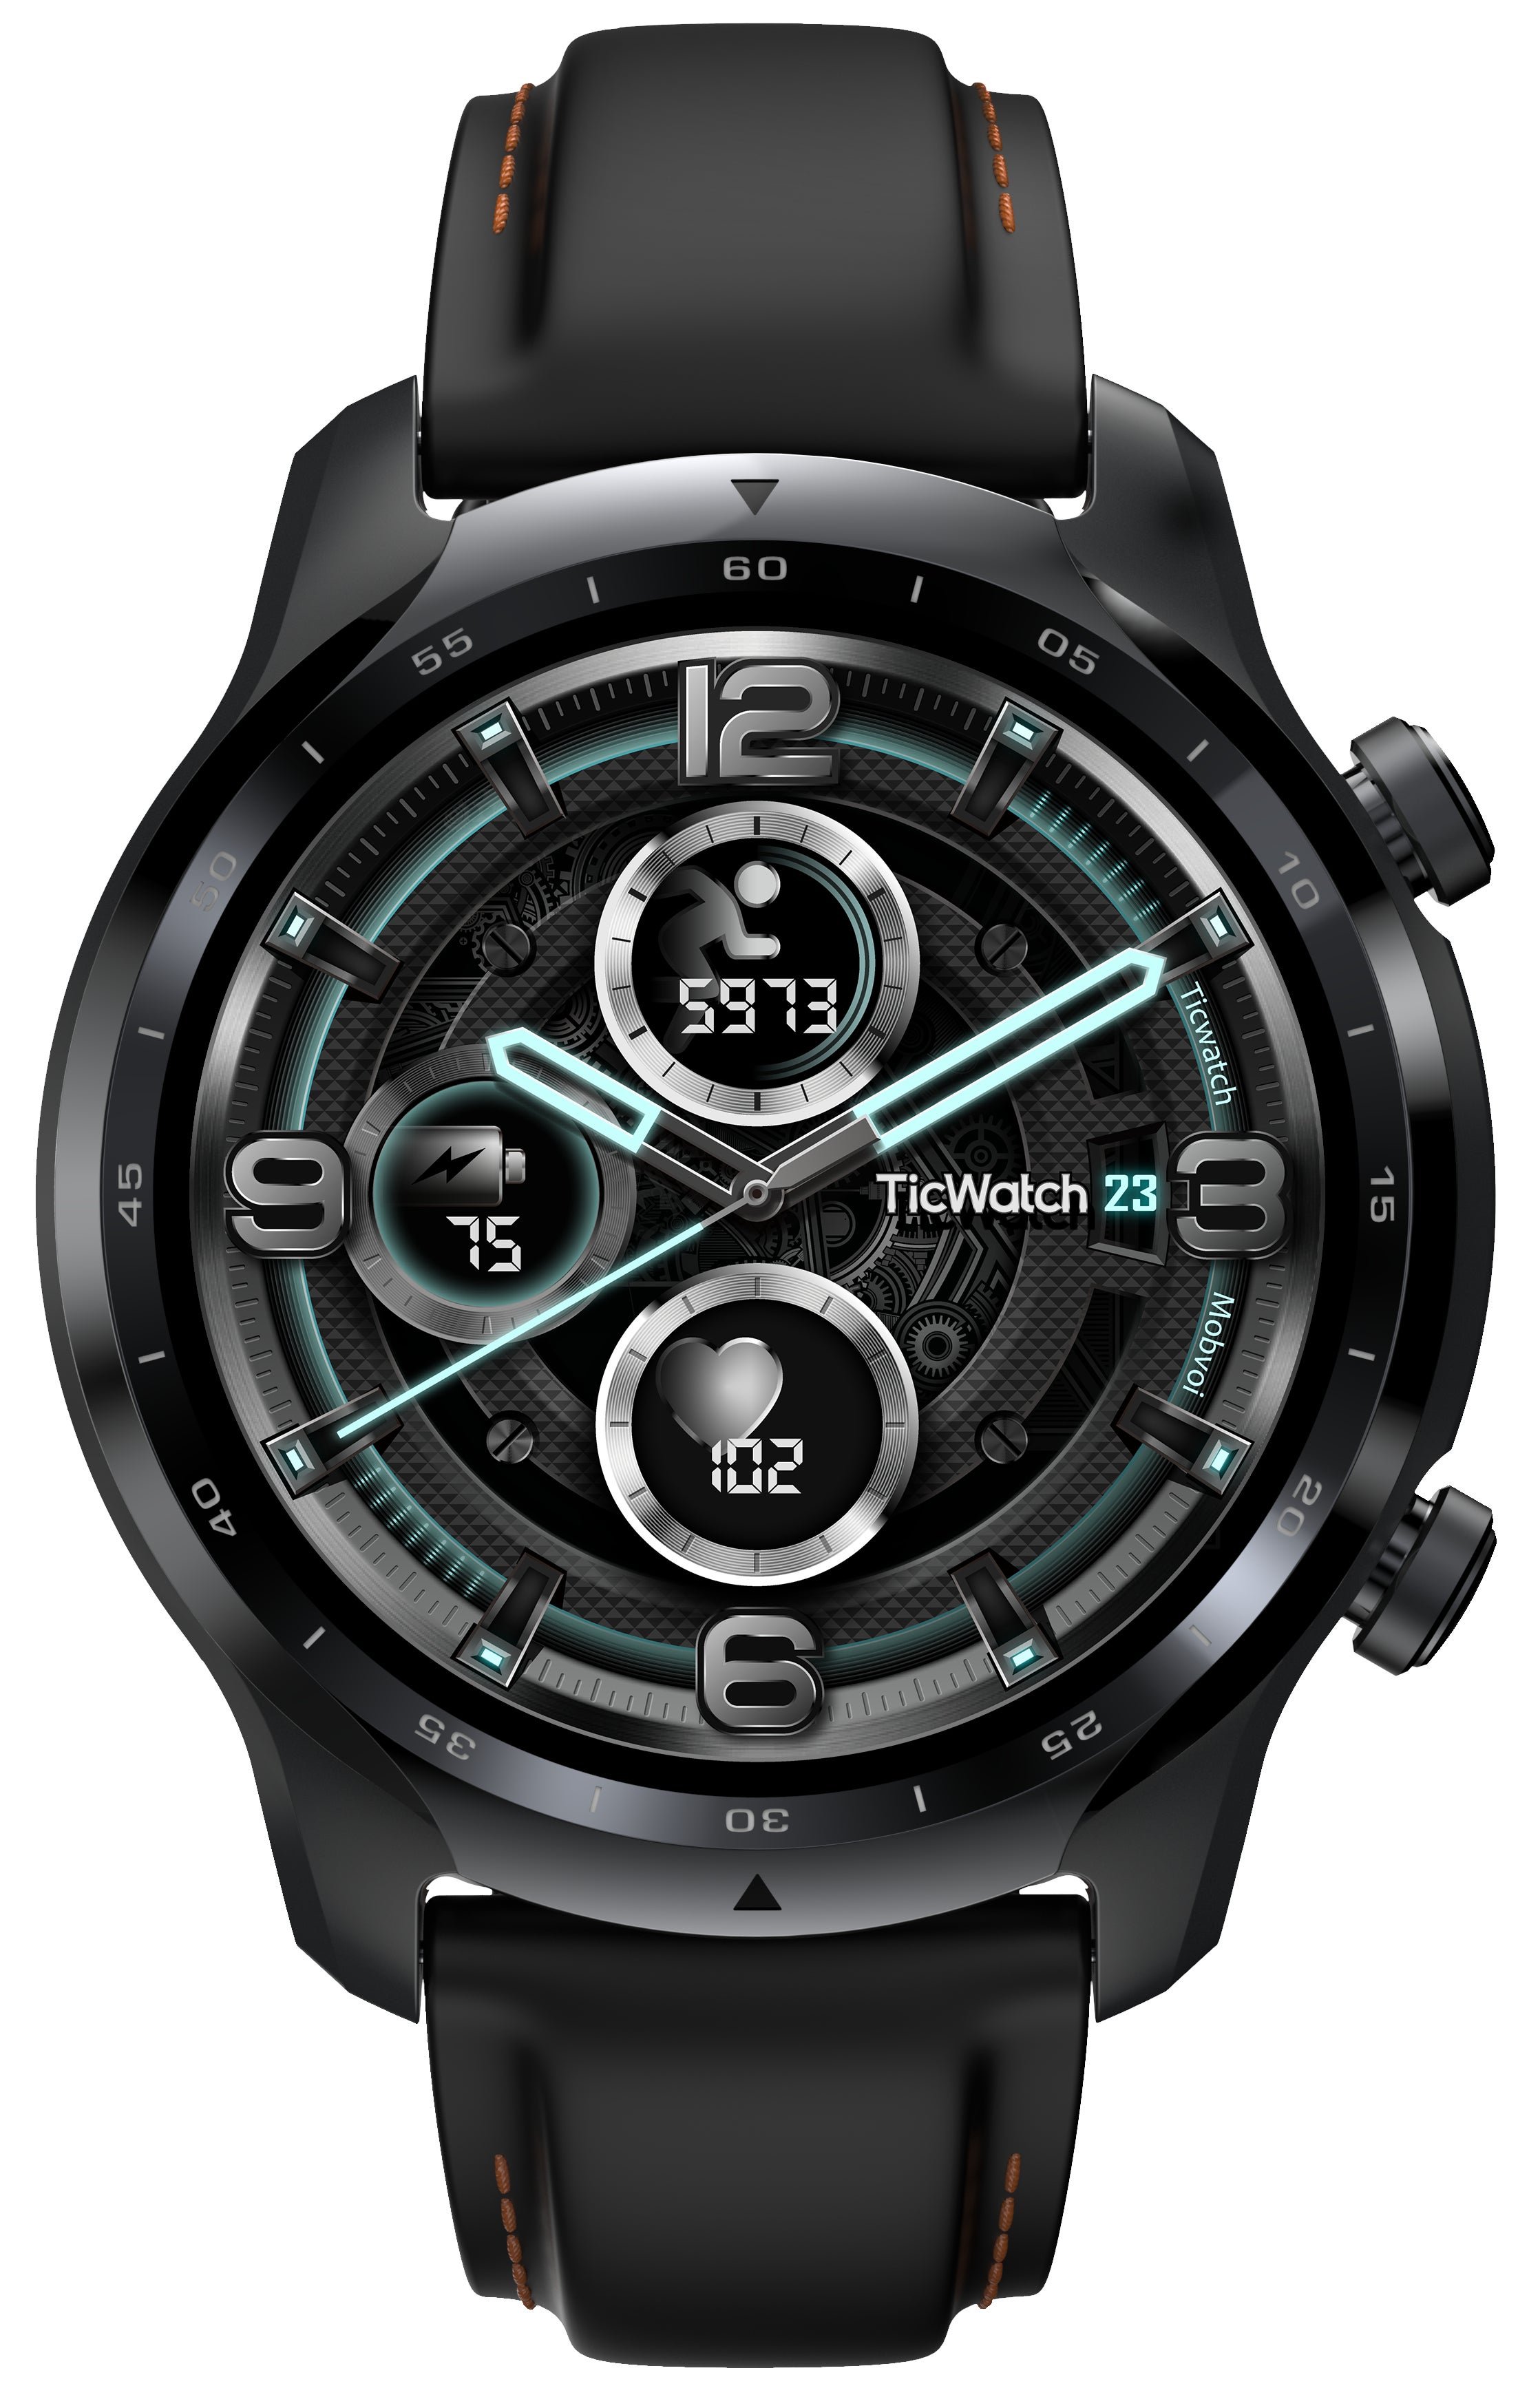 TicWatch Pro 3 is one of the first wearables with Qualcomm Snapdragon Wear 4100